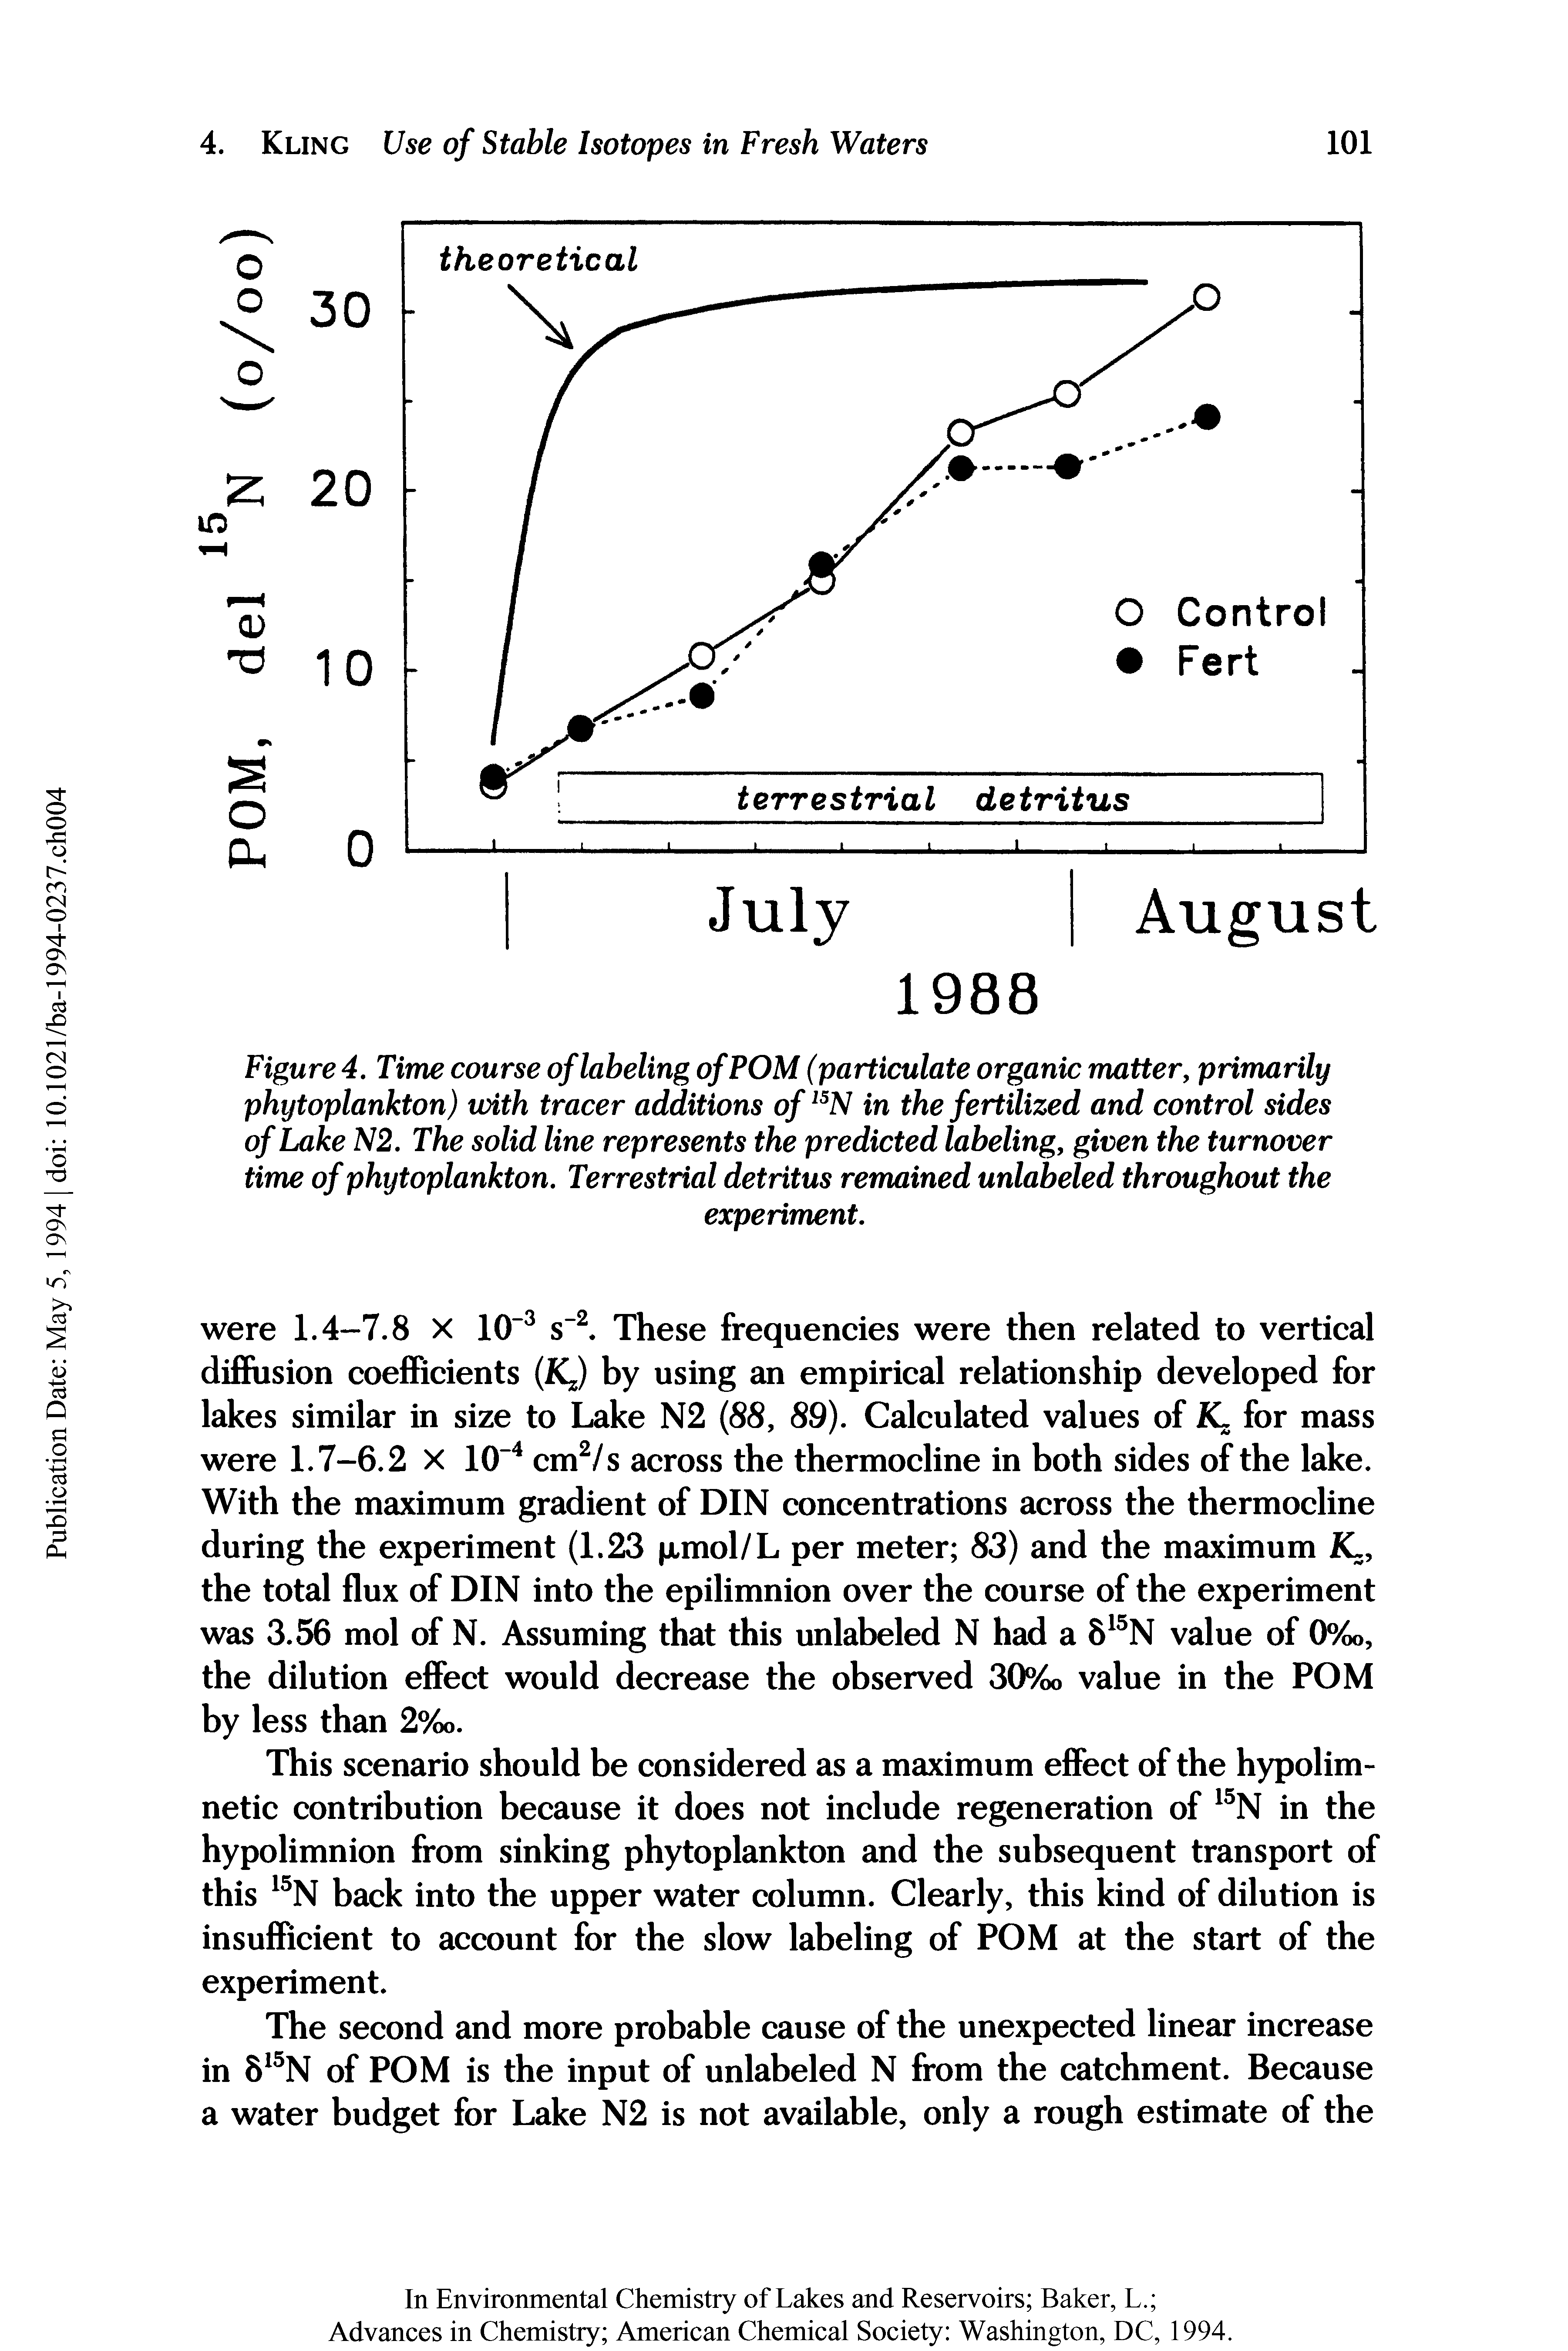 Figure 4. Time course of labeling of POM (particulate organic matter, primarily phytoplankton) with tracer additions of15N in the fertilized and control sides of Lake N2. The solid line represents the predicted labeling, given the turnover time of phytoplankton. Terrestrial detritus remained unlabeled throughout the...